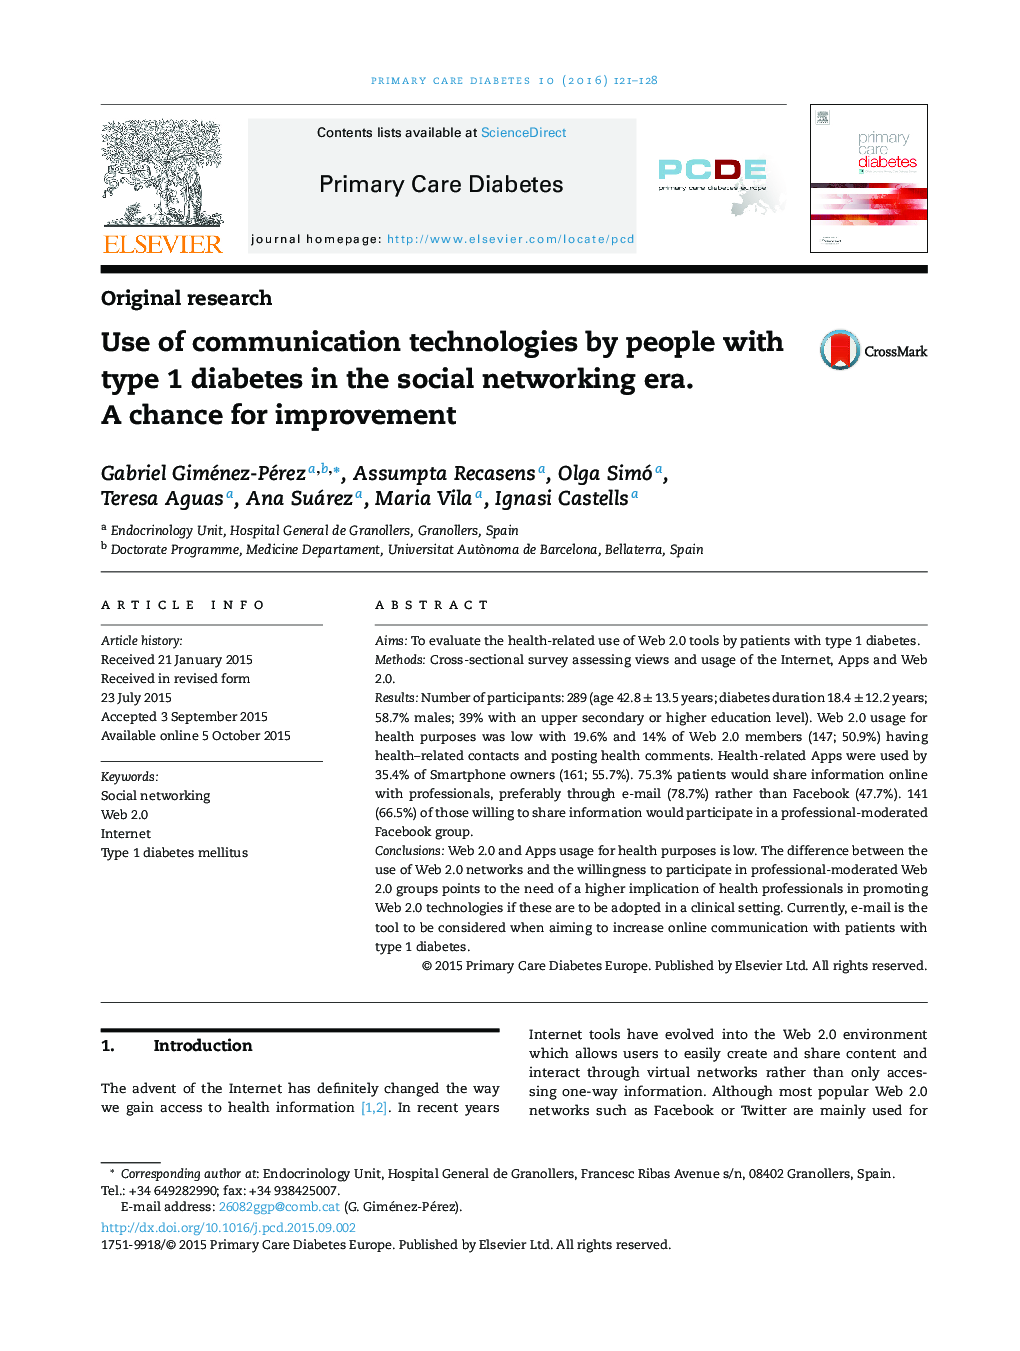 Original researchUse of communication technologies by people with type 1 diabetes in the social networking era. A chance for improvement